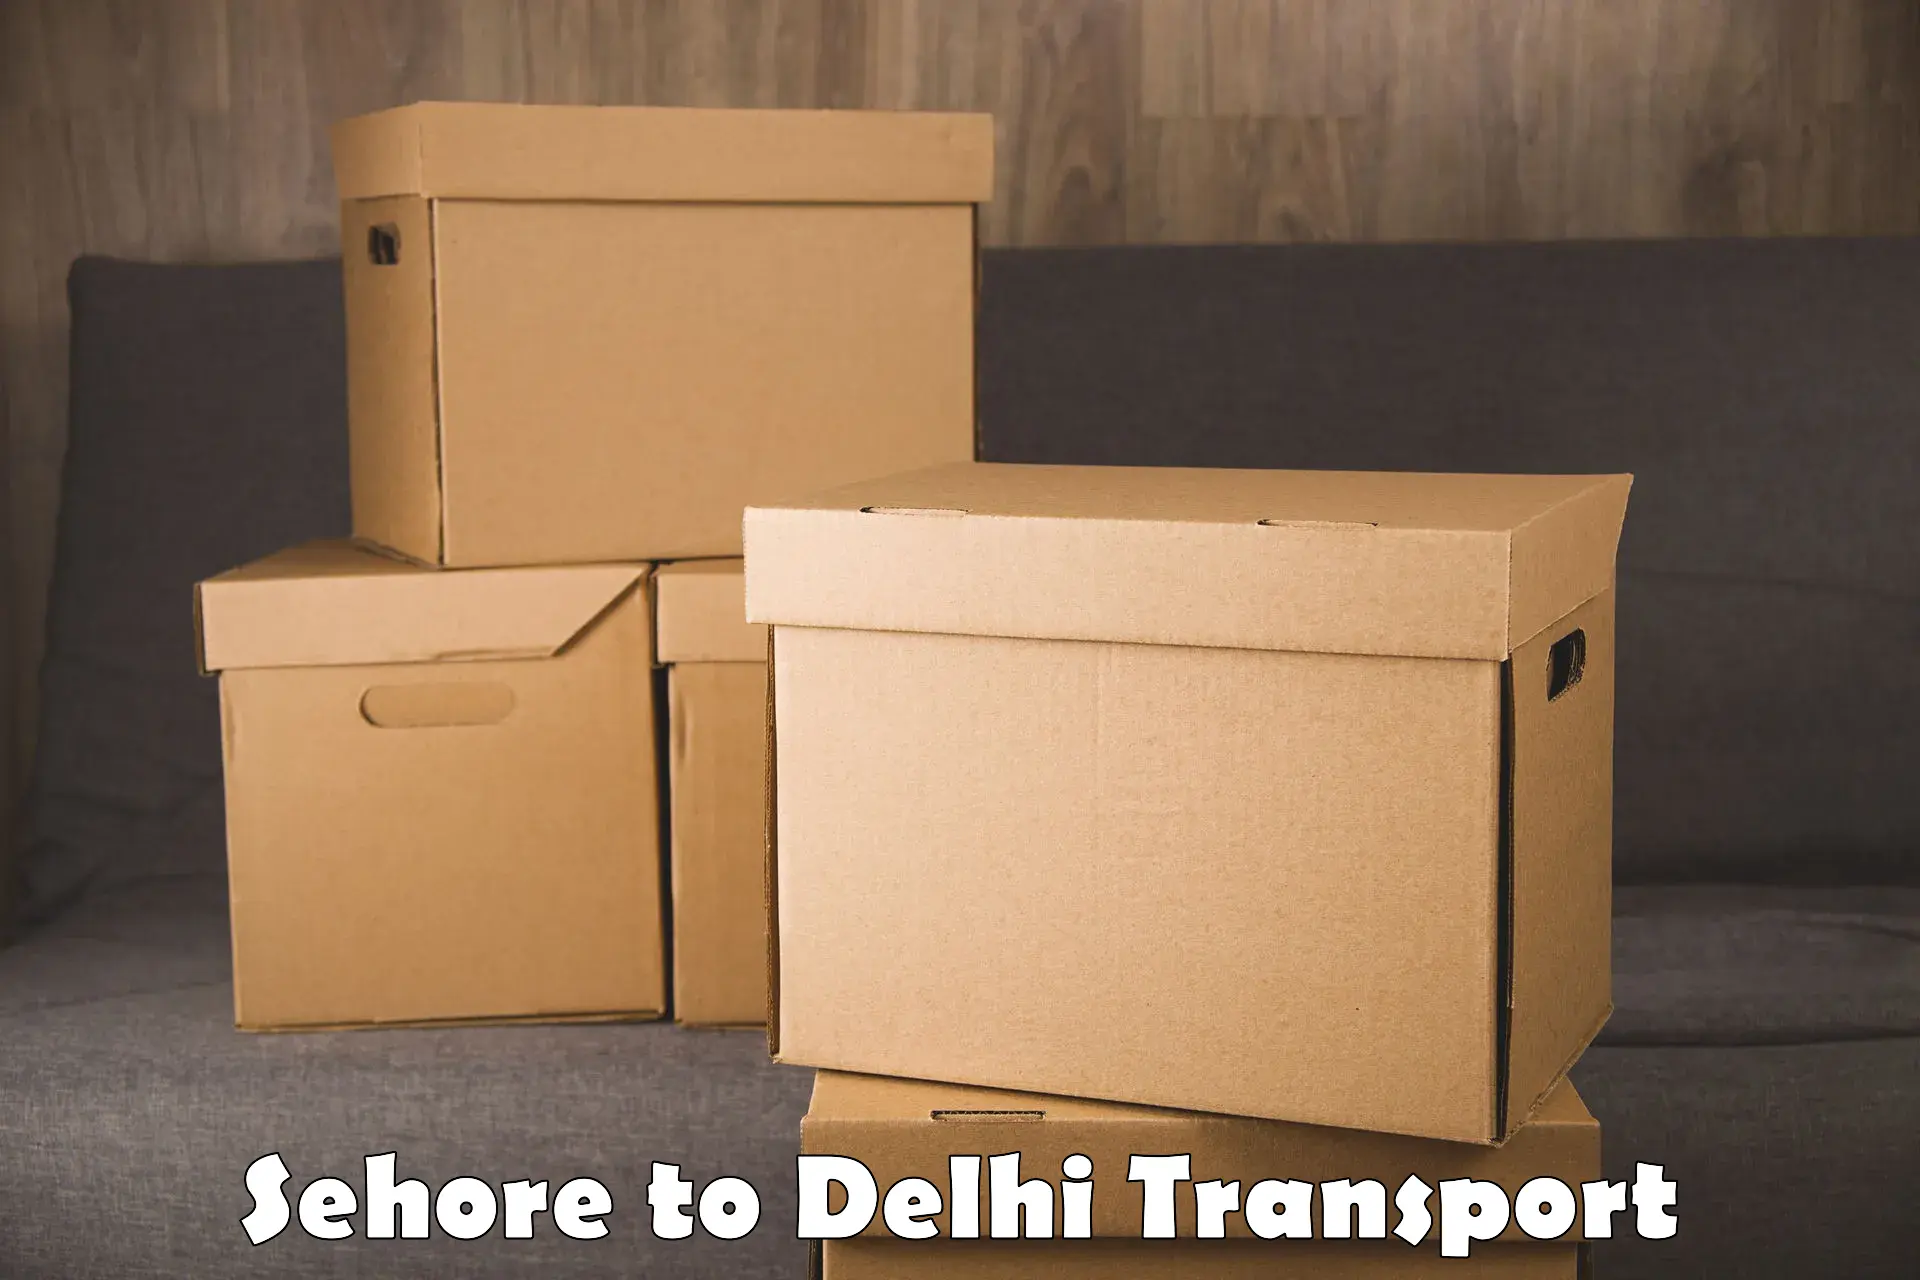 Truck transport companies in India Sehore to NCR